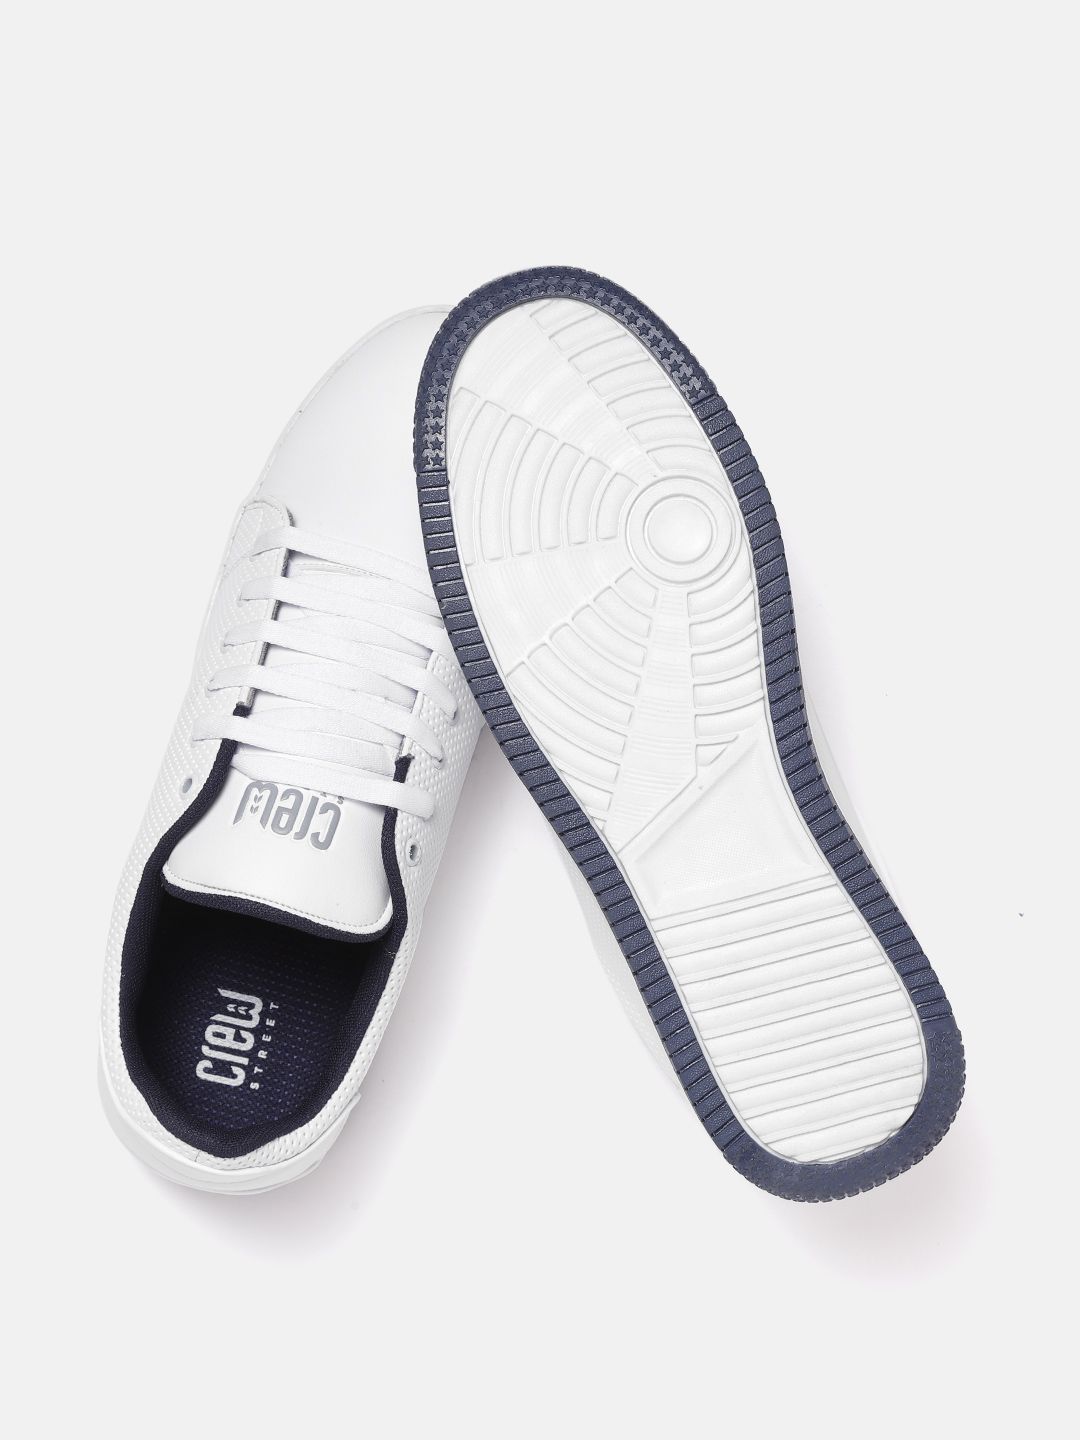 crew street casual shoes